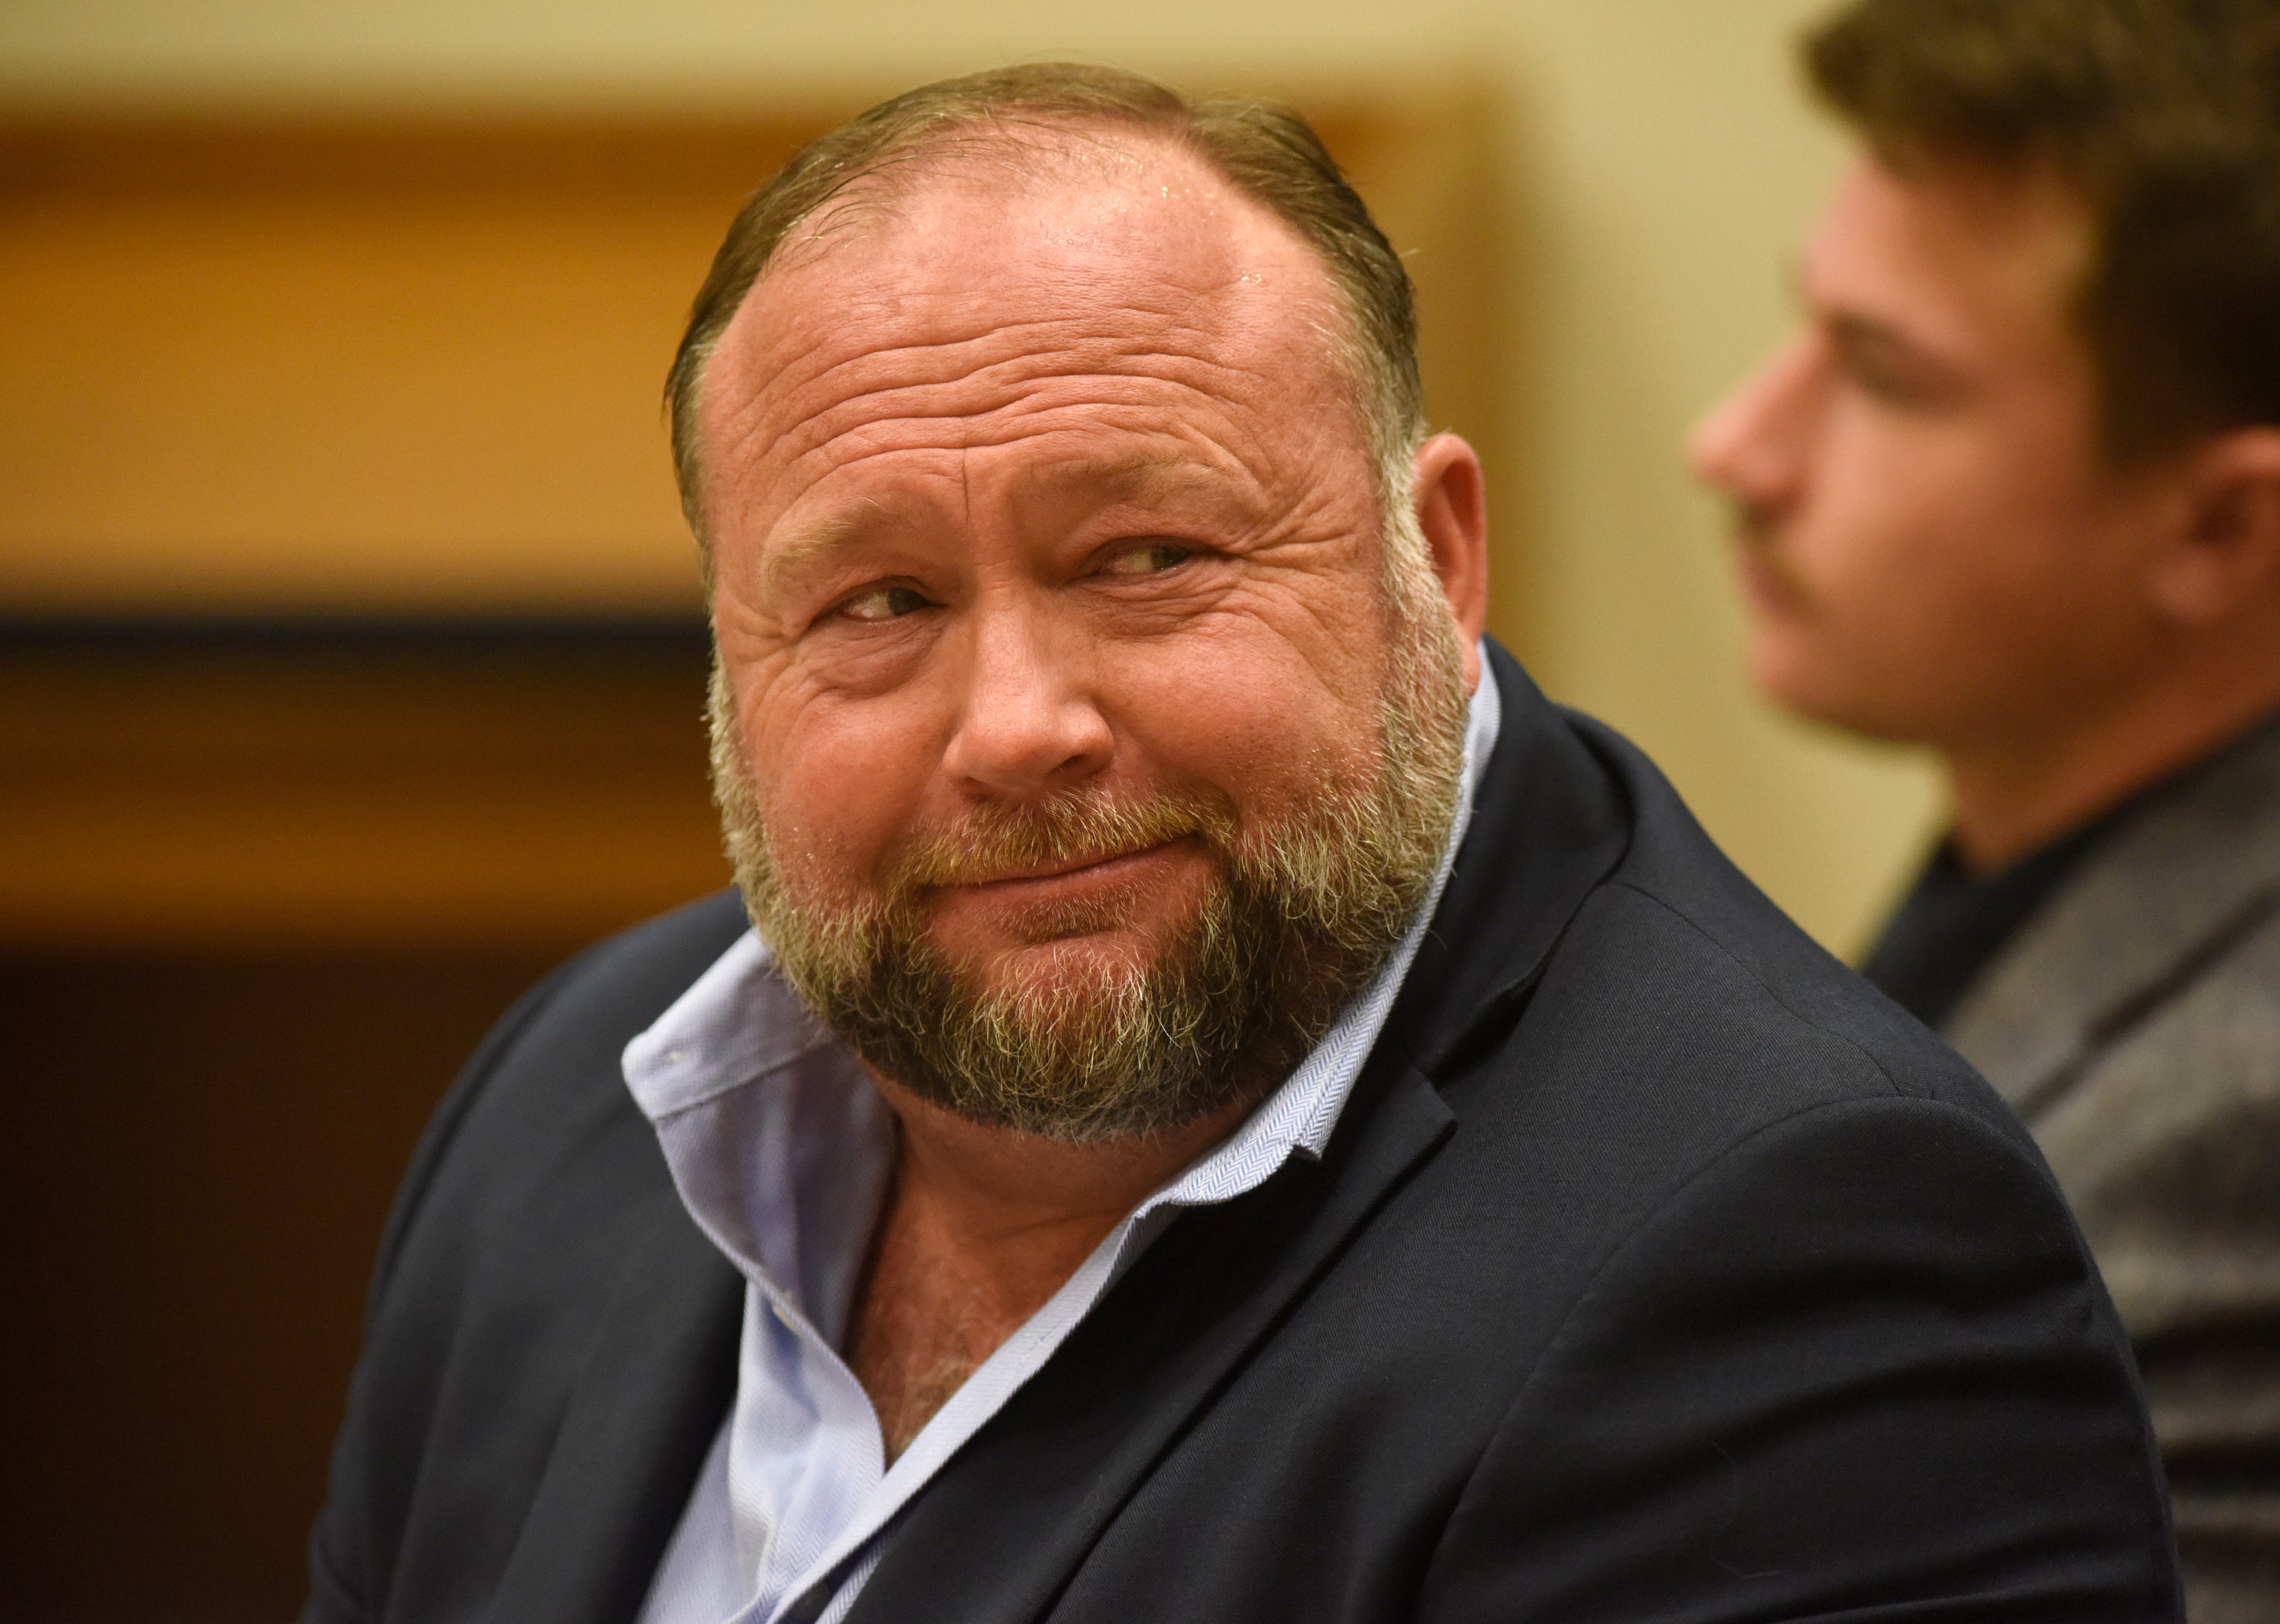 Alex Jones has been ordered to pay $1bn to the families he spent years lying about